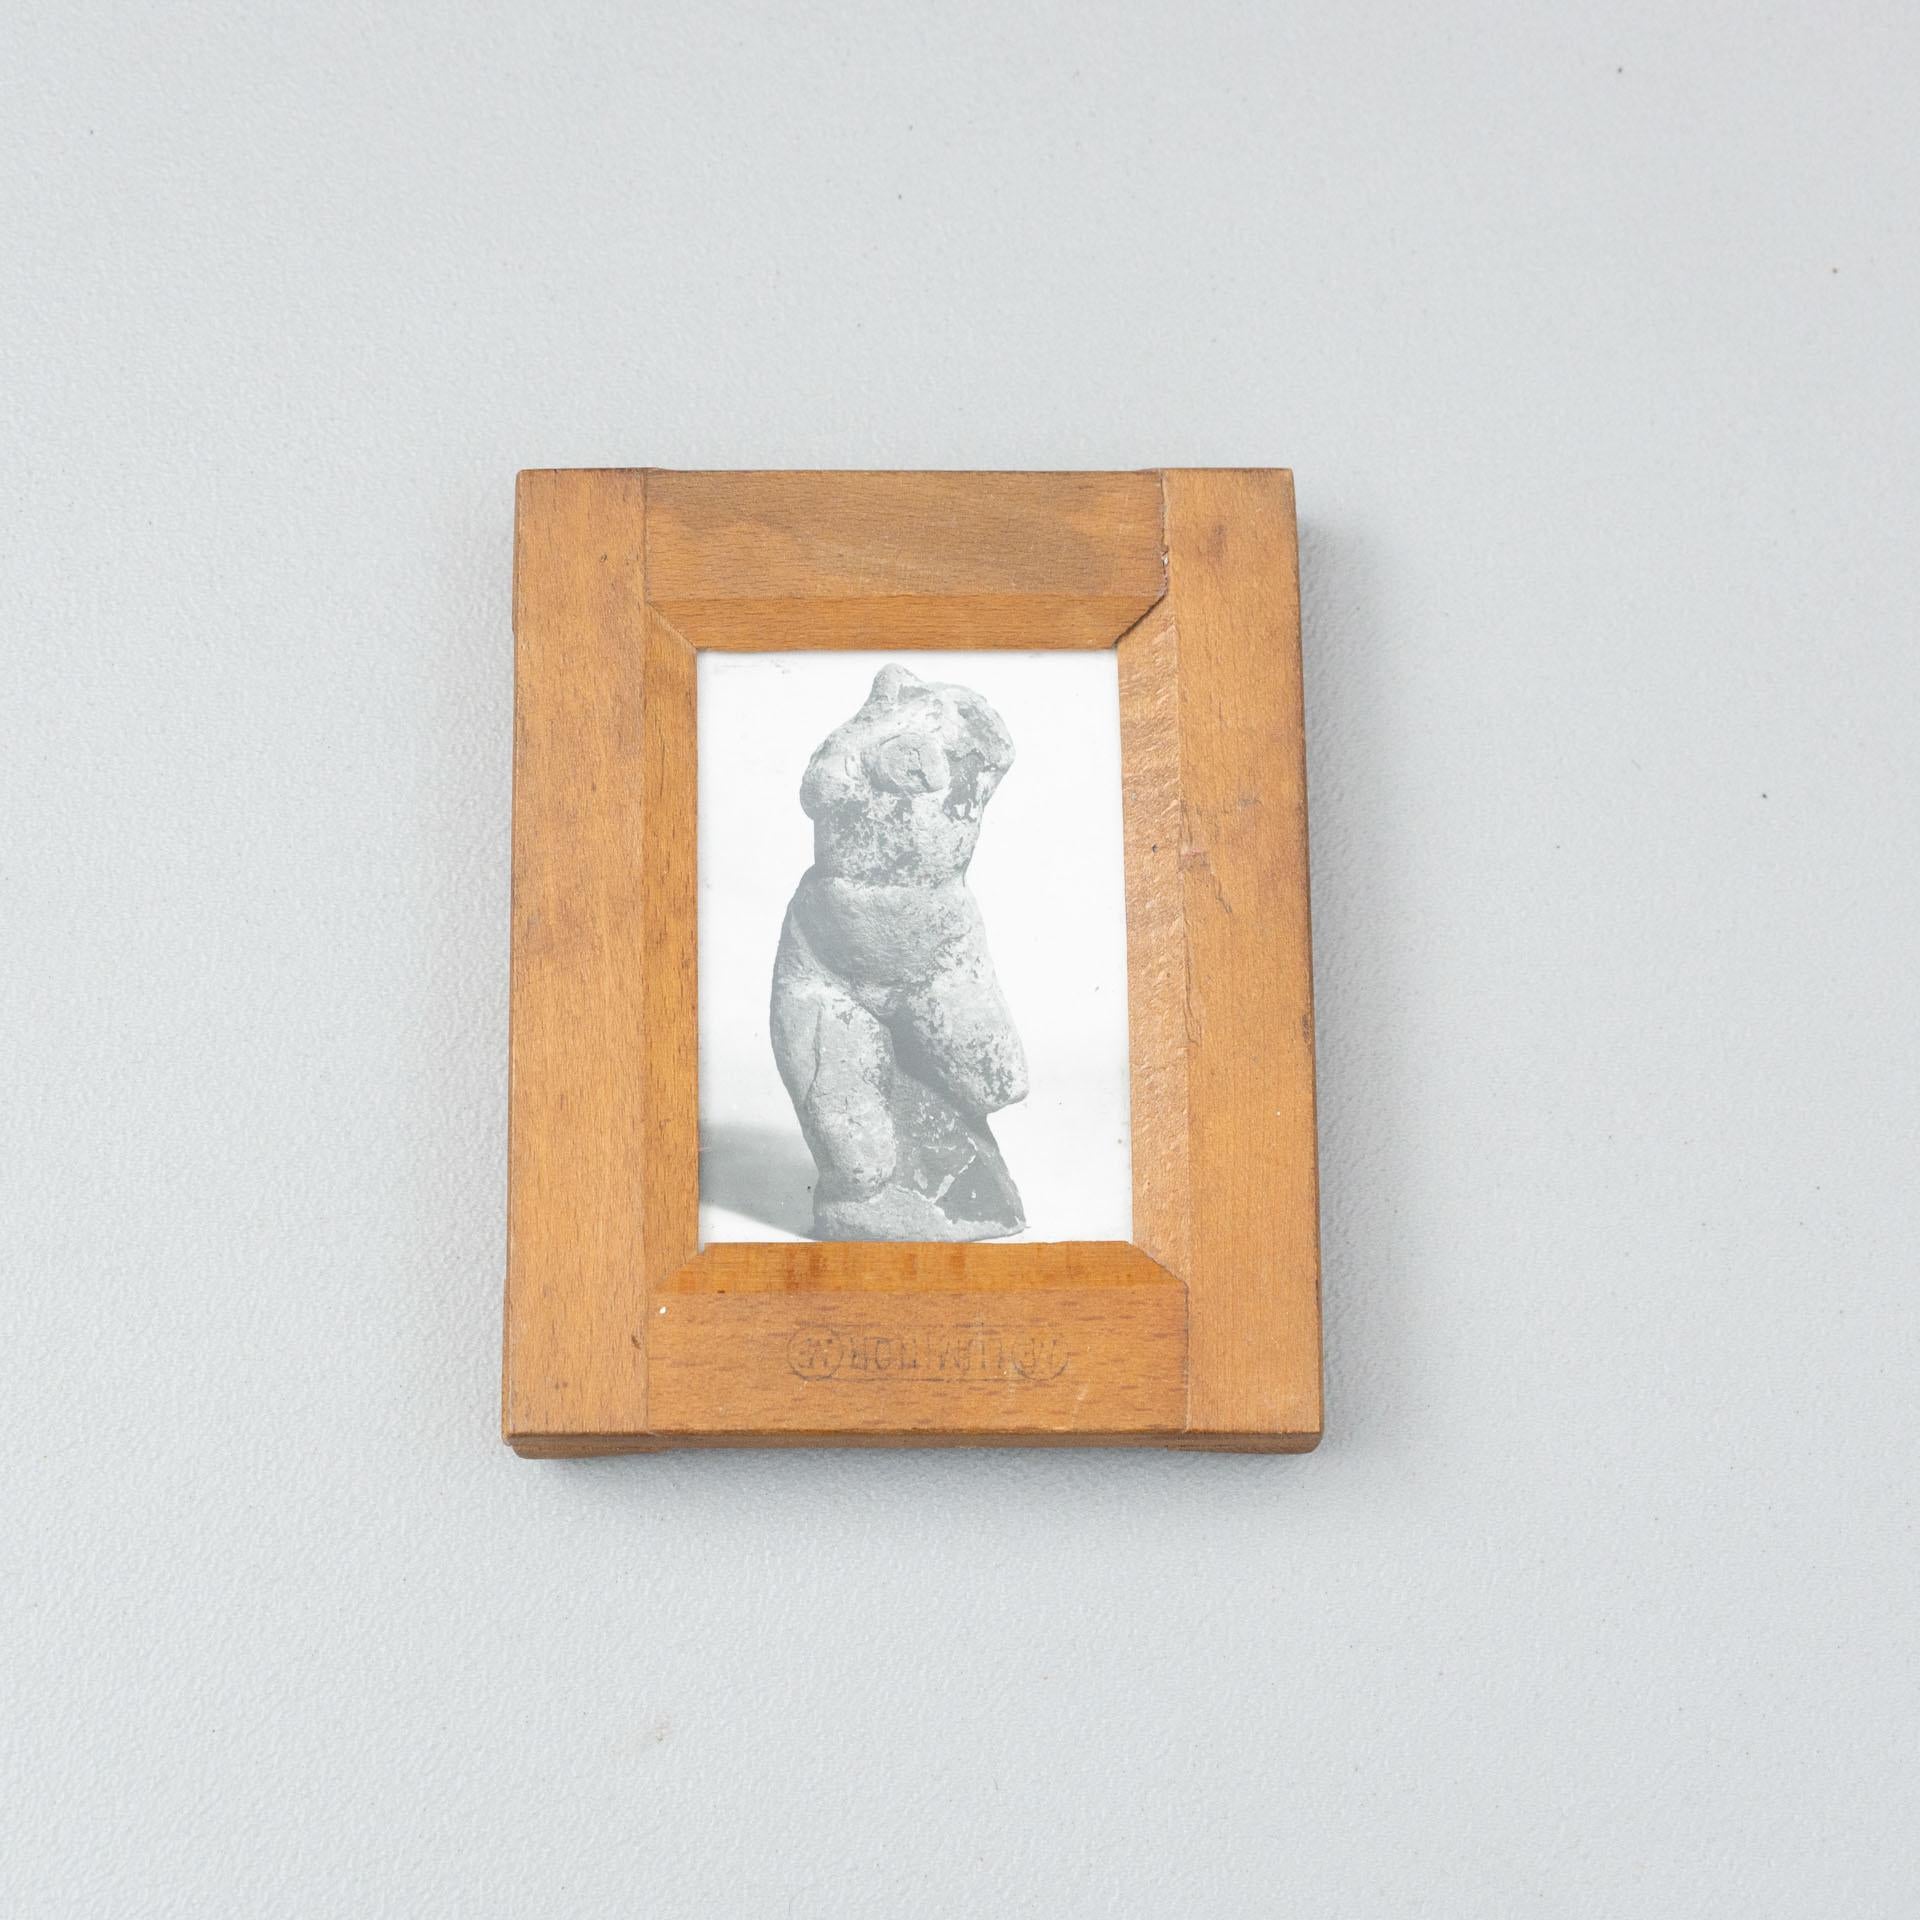 Manolo Hugué archive photography of sculpture.
Printed, circa 1960.
Wood frame included.


Materials:
Gelatin silver bromide print

Dimensions:
D 1.9 cm x W 11 cm x H 13.2 cm

We offer free worldwide shipping for this piece.